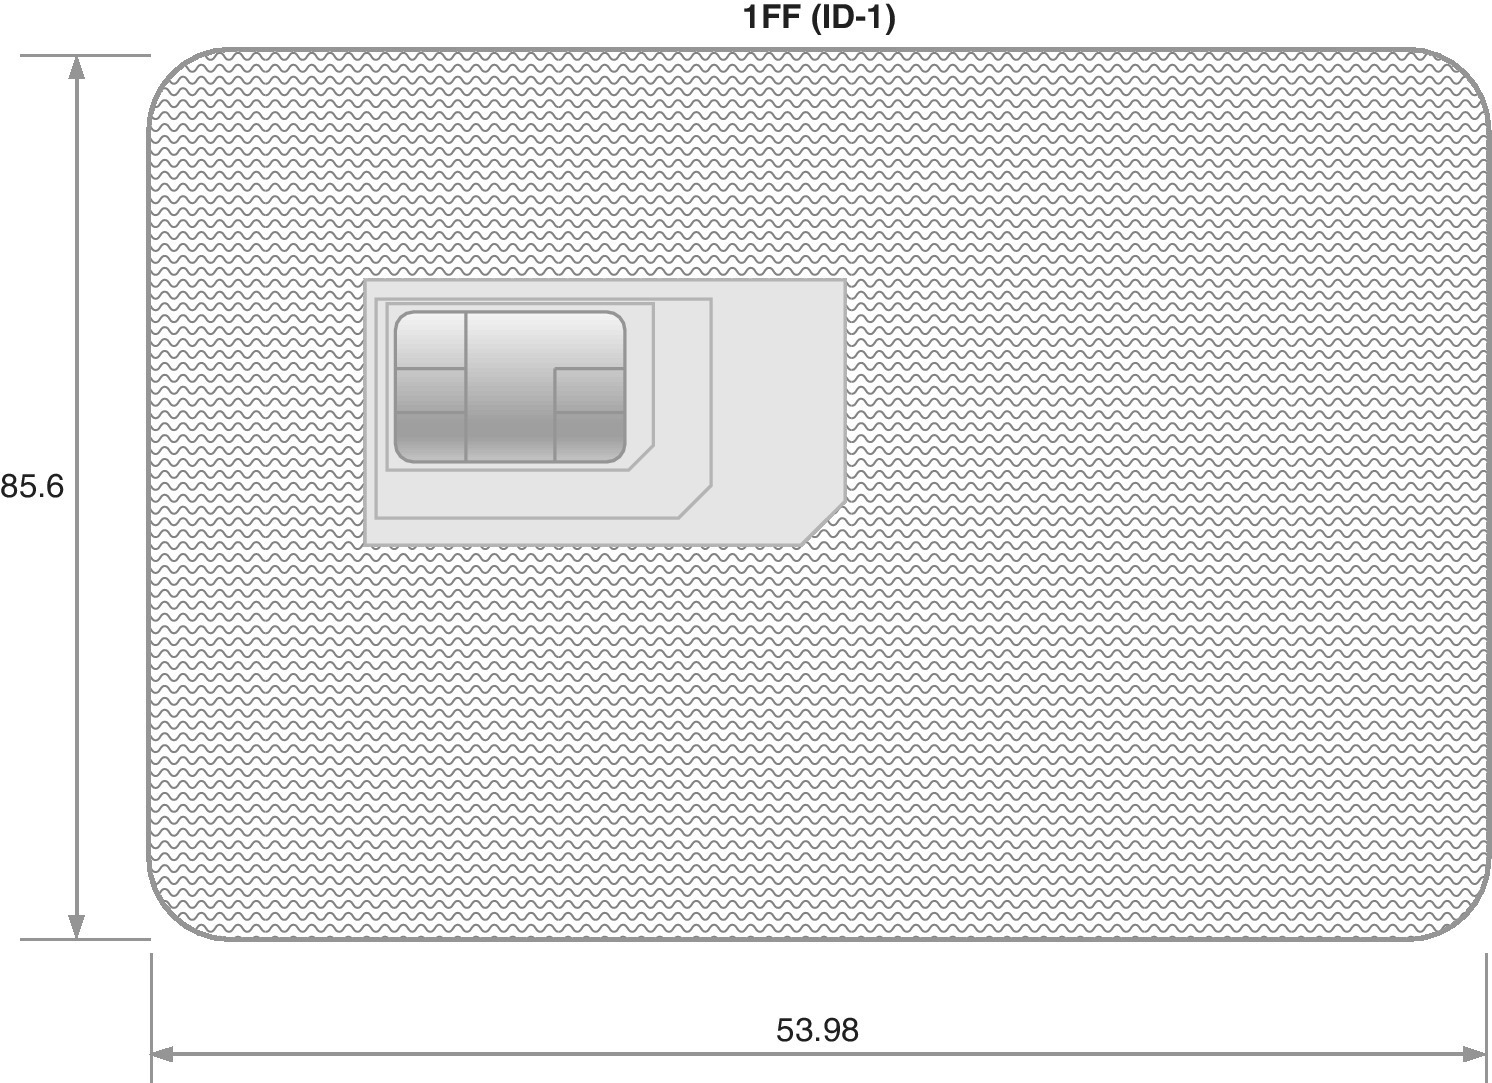 Illustration of the 1FF of SIM card labeled ID‐1, with length of 85.6 mm and width of 53.98 mm.